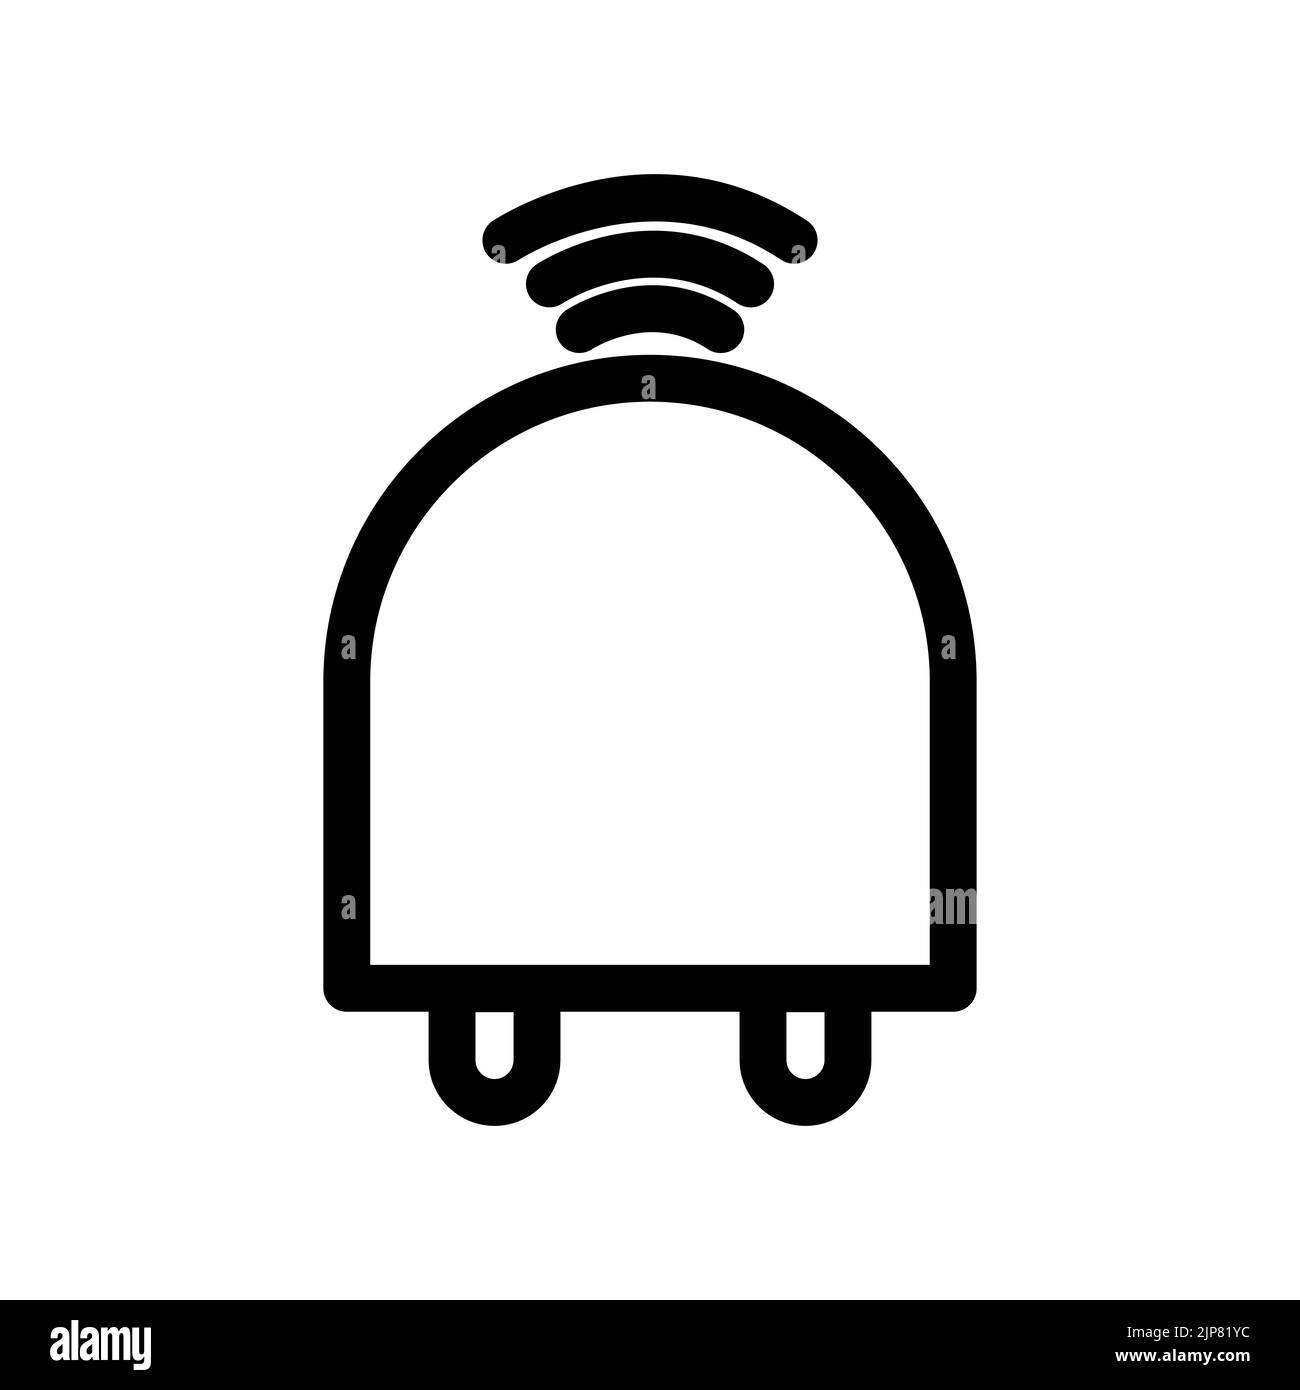 Charger icon with signal. icon related to electronic, technology, smart device, line icon style. Simple design editable Stock Vector